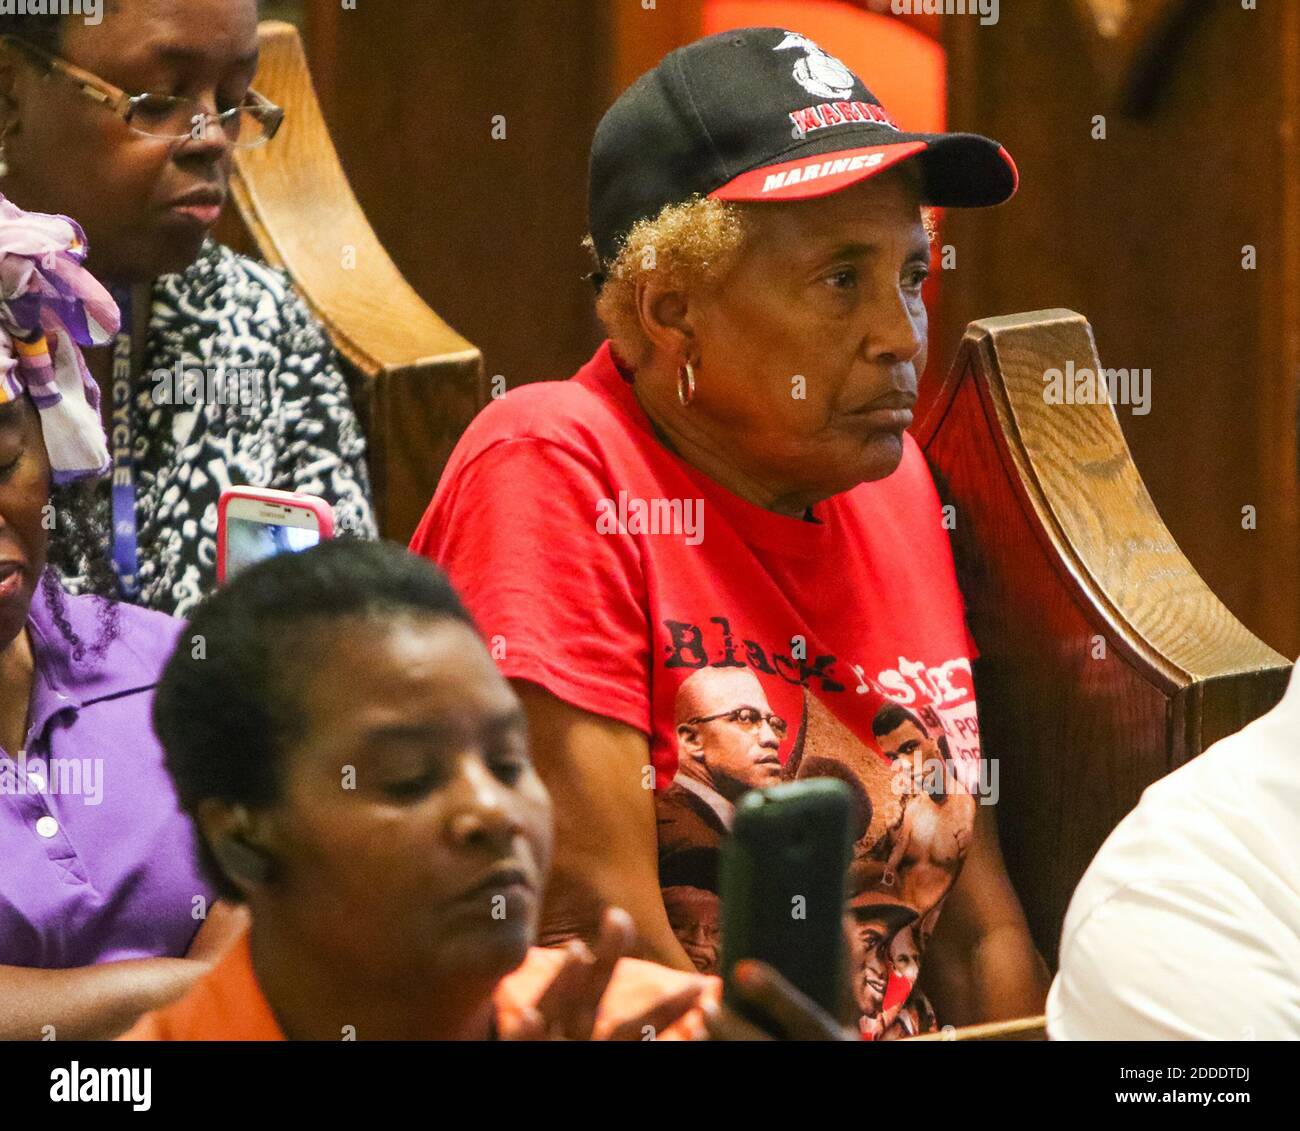 NO FILM, NO VIDEO, NO TV, NO DOCUMENTARY - A prayer vigil is held on June 18, 2015 at Morris Brown AME Church for the nine people who were killed by a gunman in Emanuel AME Church in Charleston, SC, USA. Photo by Tim Dominick/The State/TNS/ABACAPRESS.COM Stock Photo